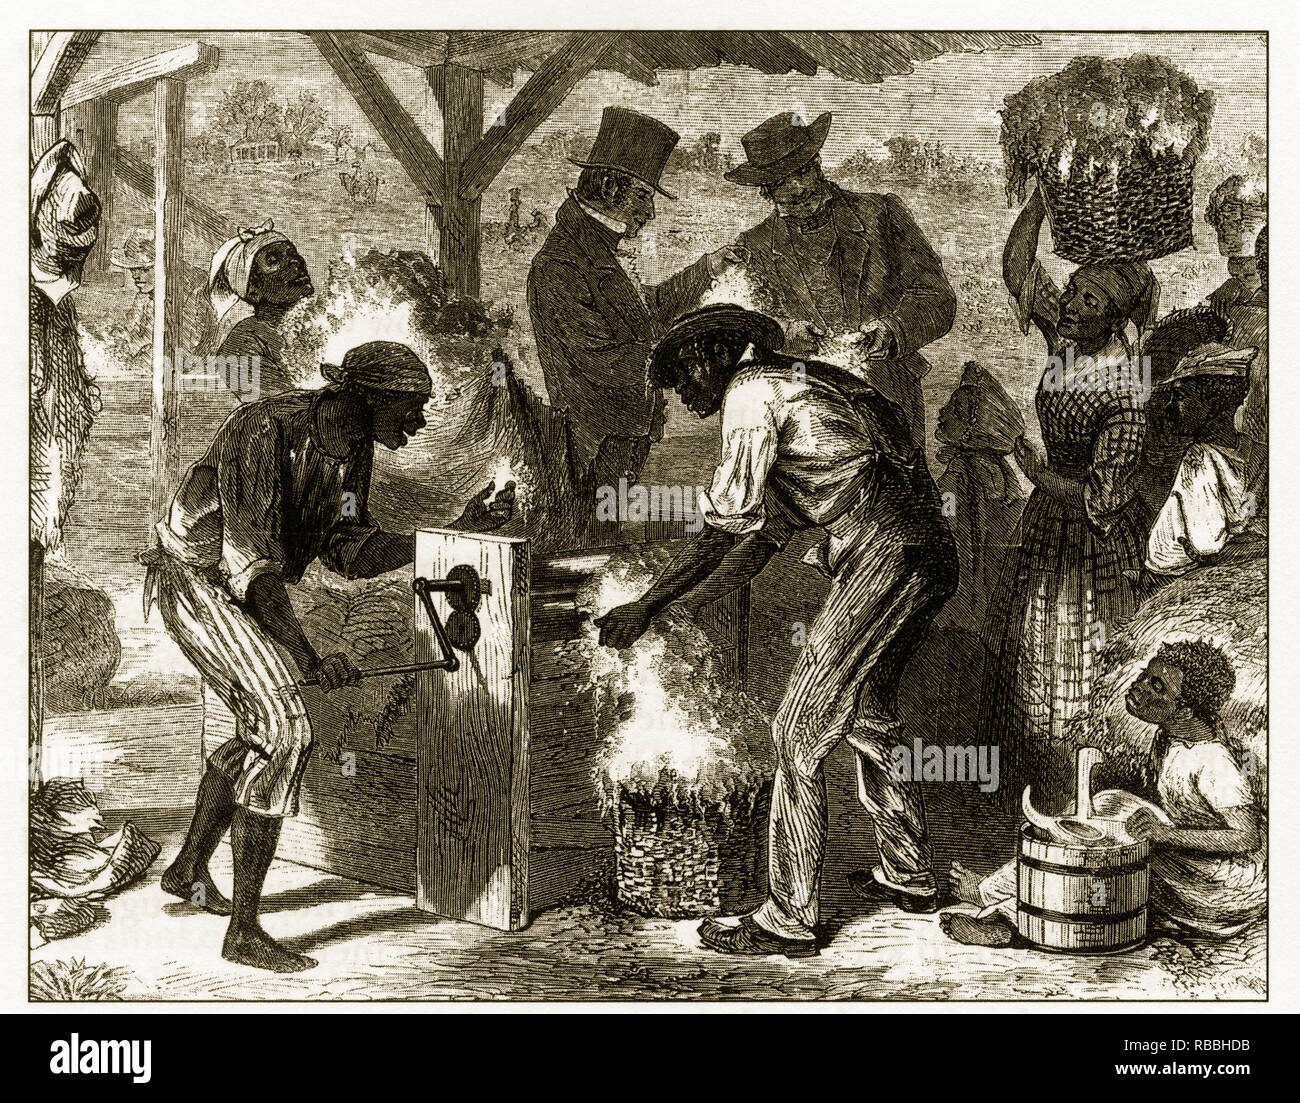 Antique Early American Engraving Depicting Social Issues, Circa 1850's Stock Photo